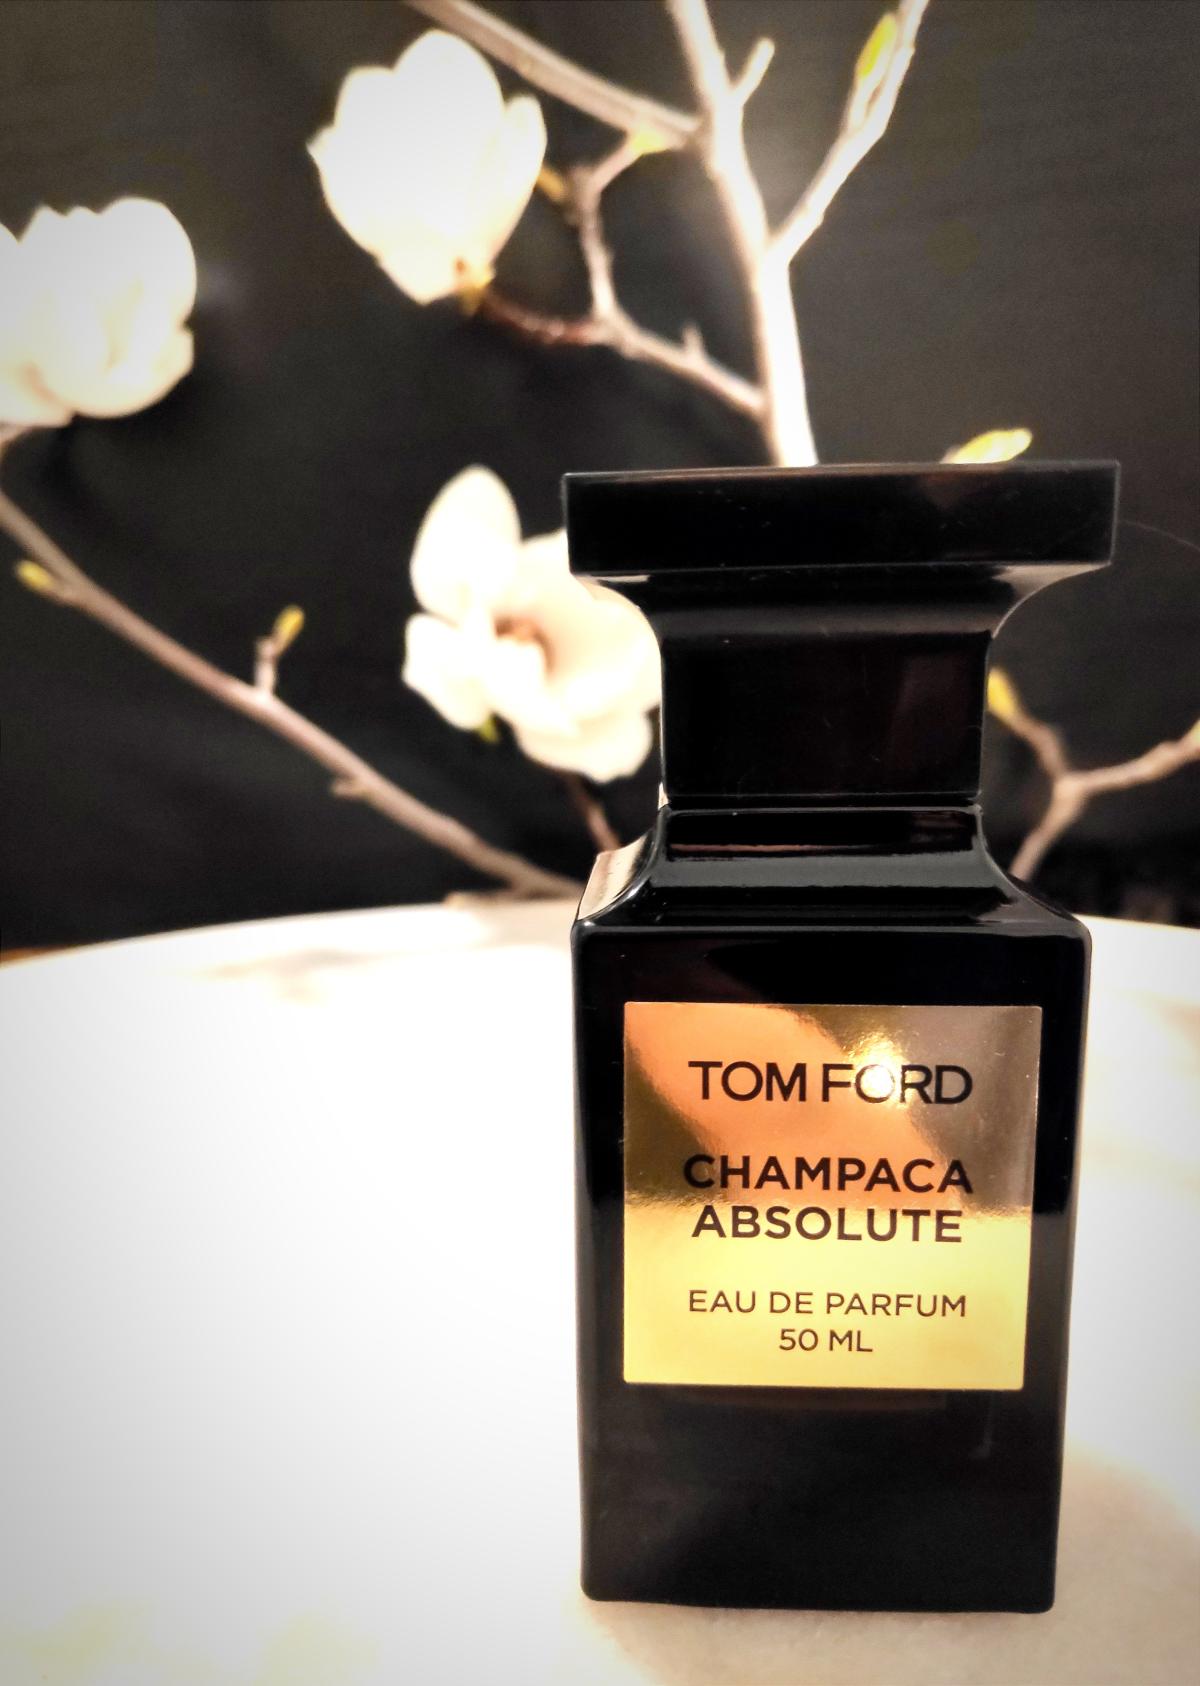 Champaca Absolute Tom Ford perfume - a fragrance for women and men 2009